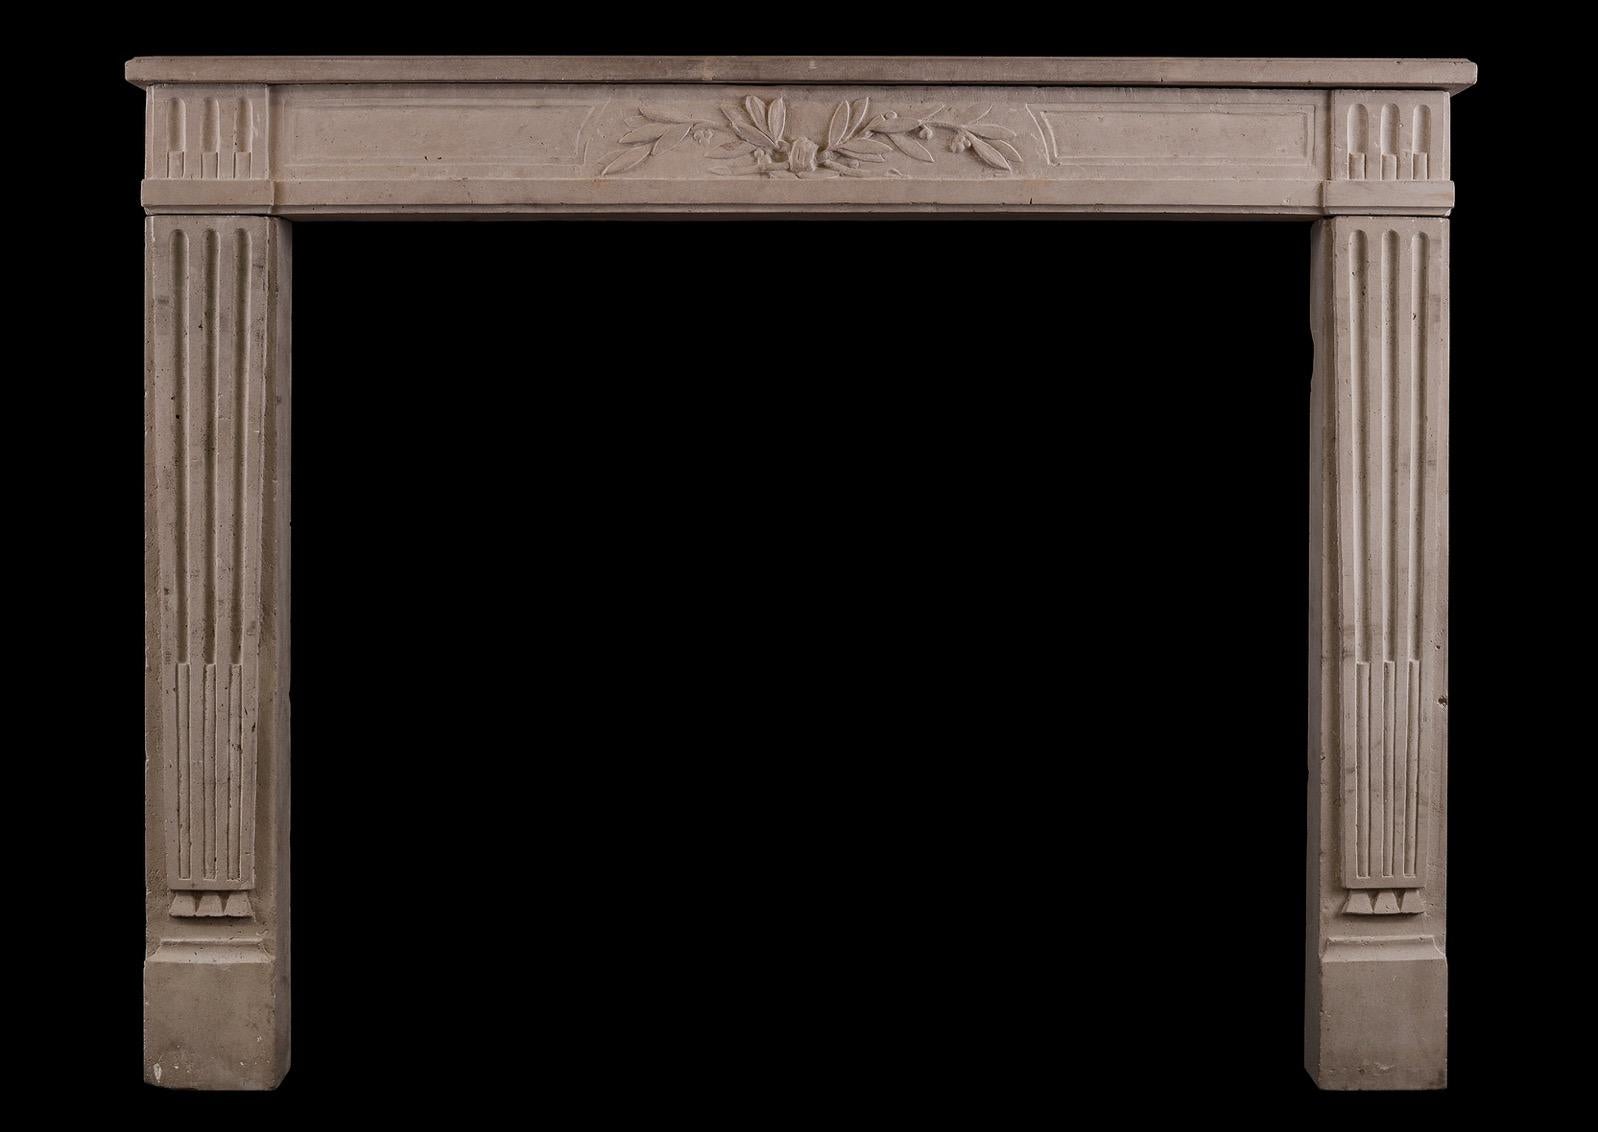 A 19th century French Louis XVI style stone fireplace. The stop-fluted jambs surmounted by carved frieze featuring tied leaves. Moulded shelf above.

Shelf Width:	1335 mm      	52 1/2 in
Overall Height:	1055 mm      	41 1/2 in
Opening Height:	900 mm